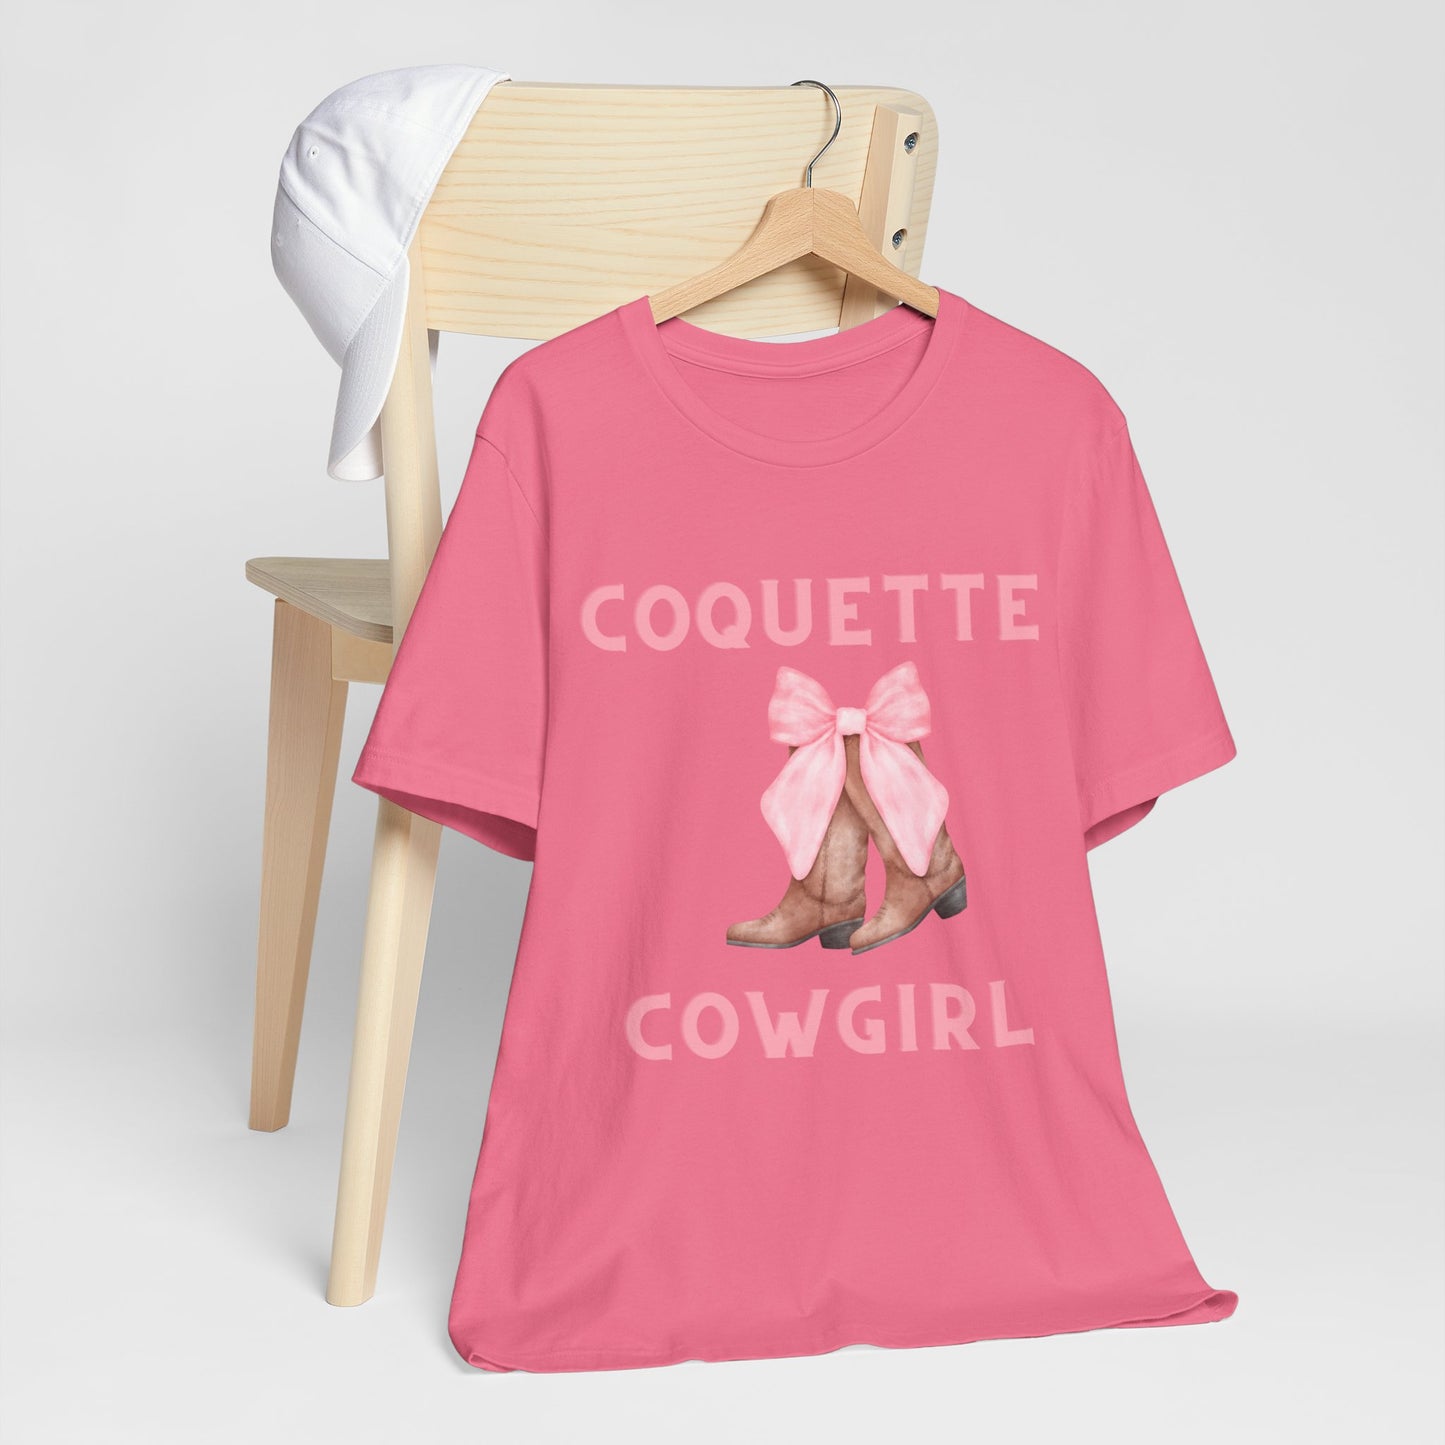 Coquette Cowgirl Bow & Boots Women's Jersey Short Sleeved Tee Size S-2xl